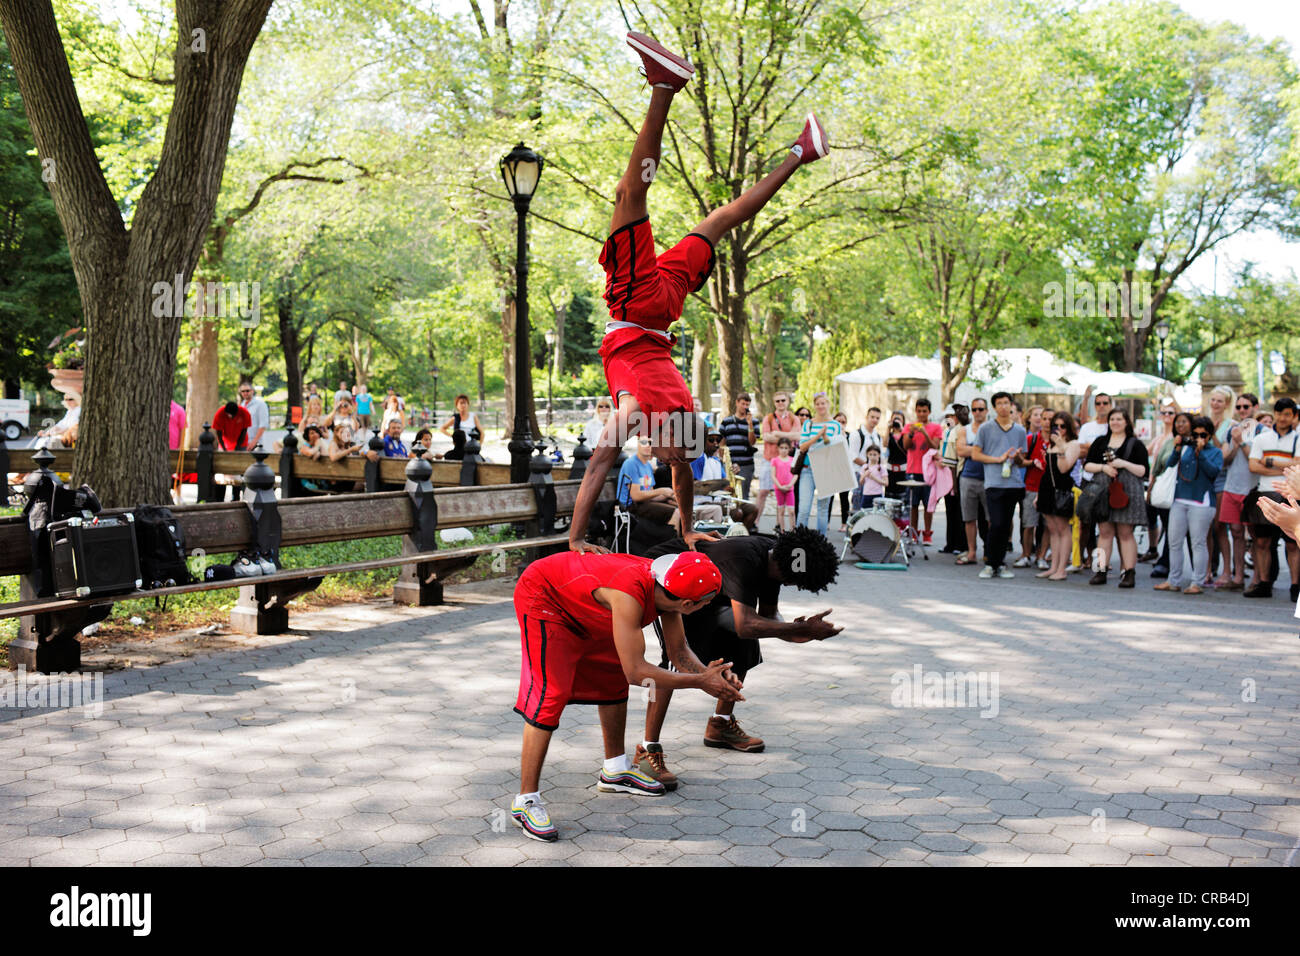 NEW YORK CITY, USA - JUNE 14: Street artist team "Afrobats" performing in Central Park. June 14, 2012 in New York City, USA Stock Photo